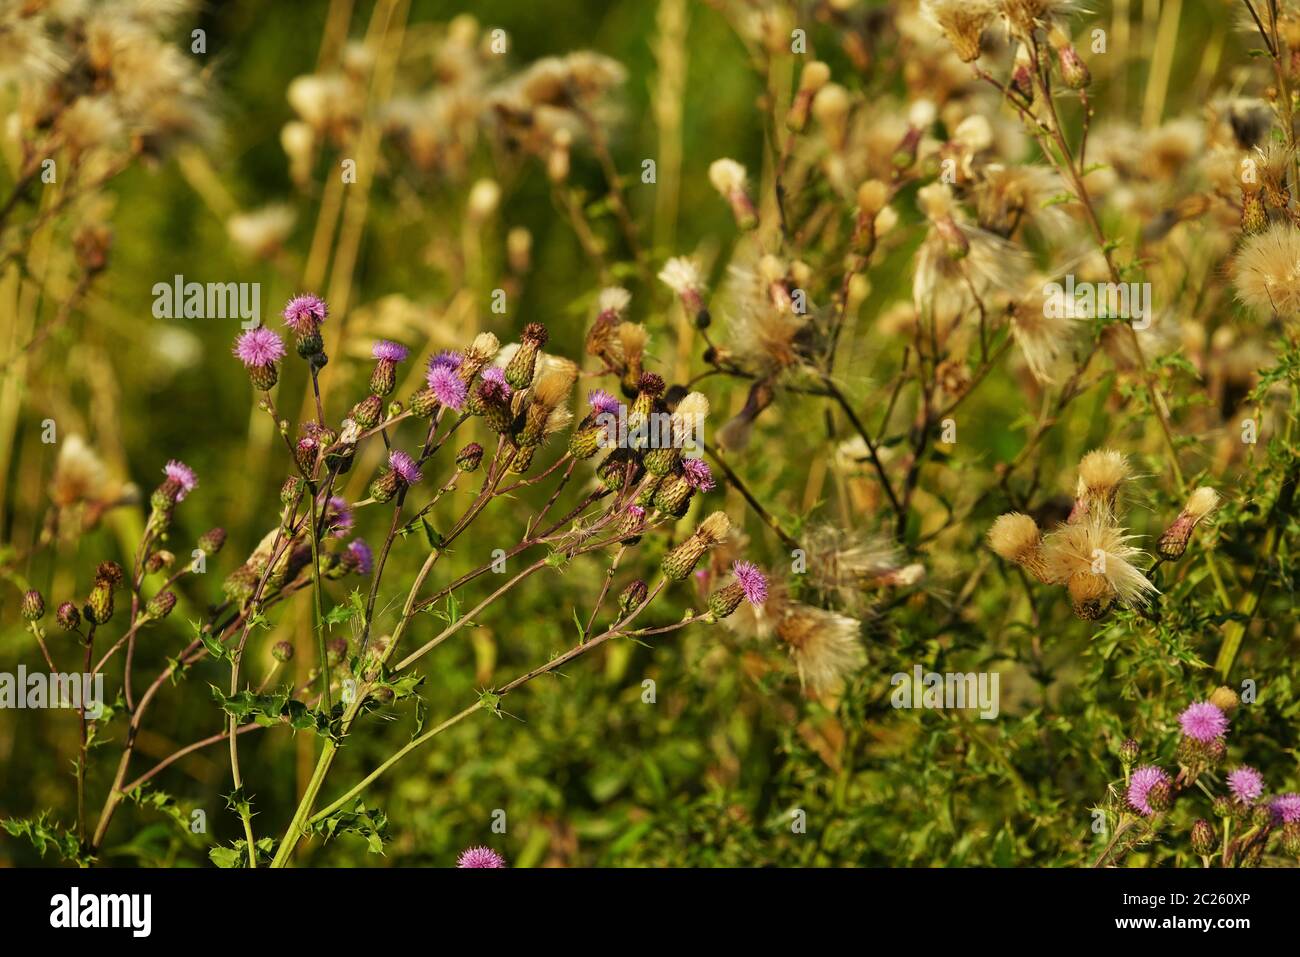 Common donkey thistle, Onopordum acanthium, in a meadow in August Stock Photo